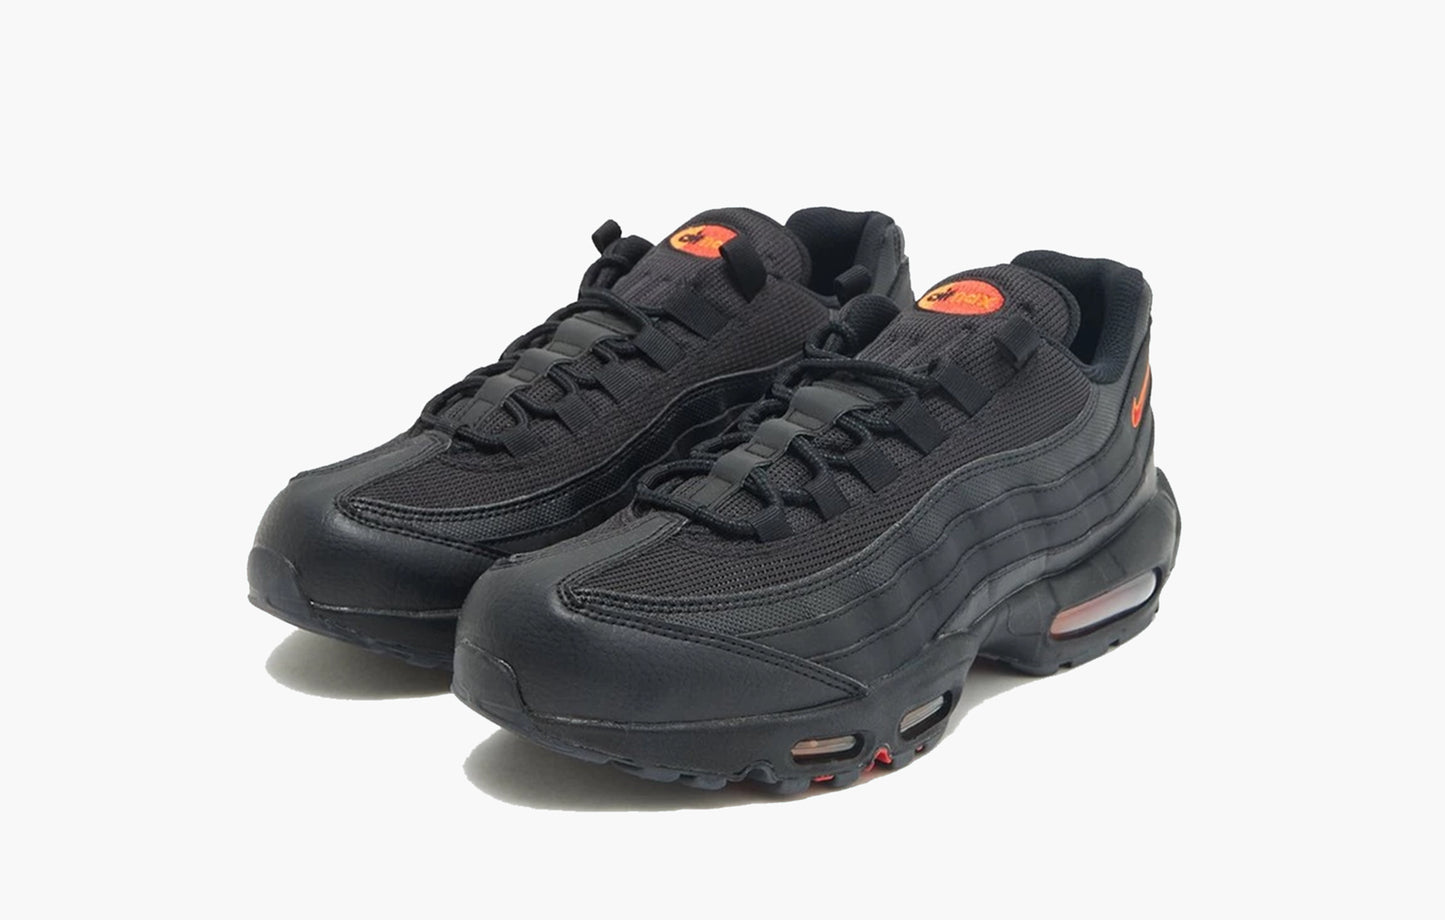 Nike Air Max 95 - Fire Red Gradient Bubble